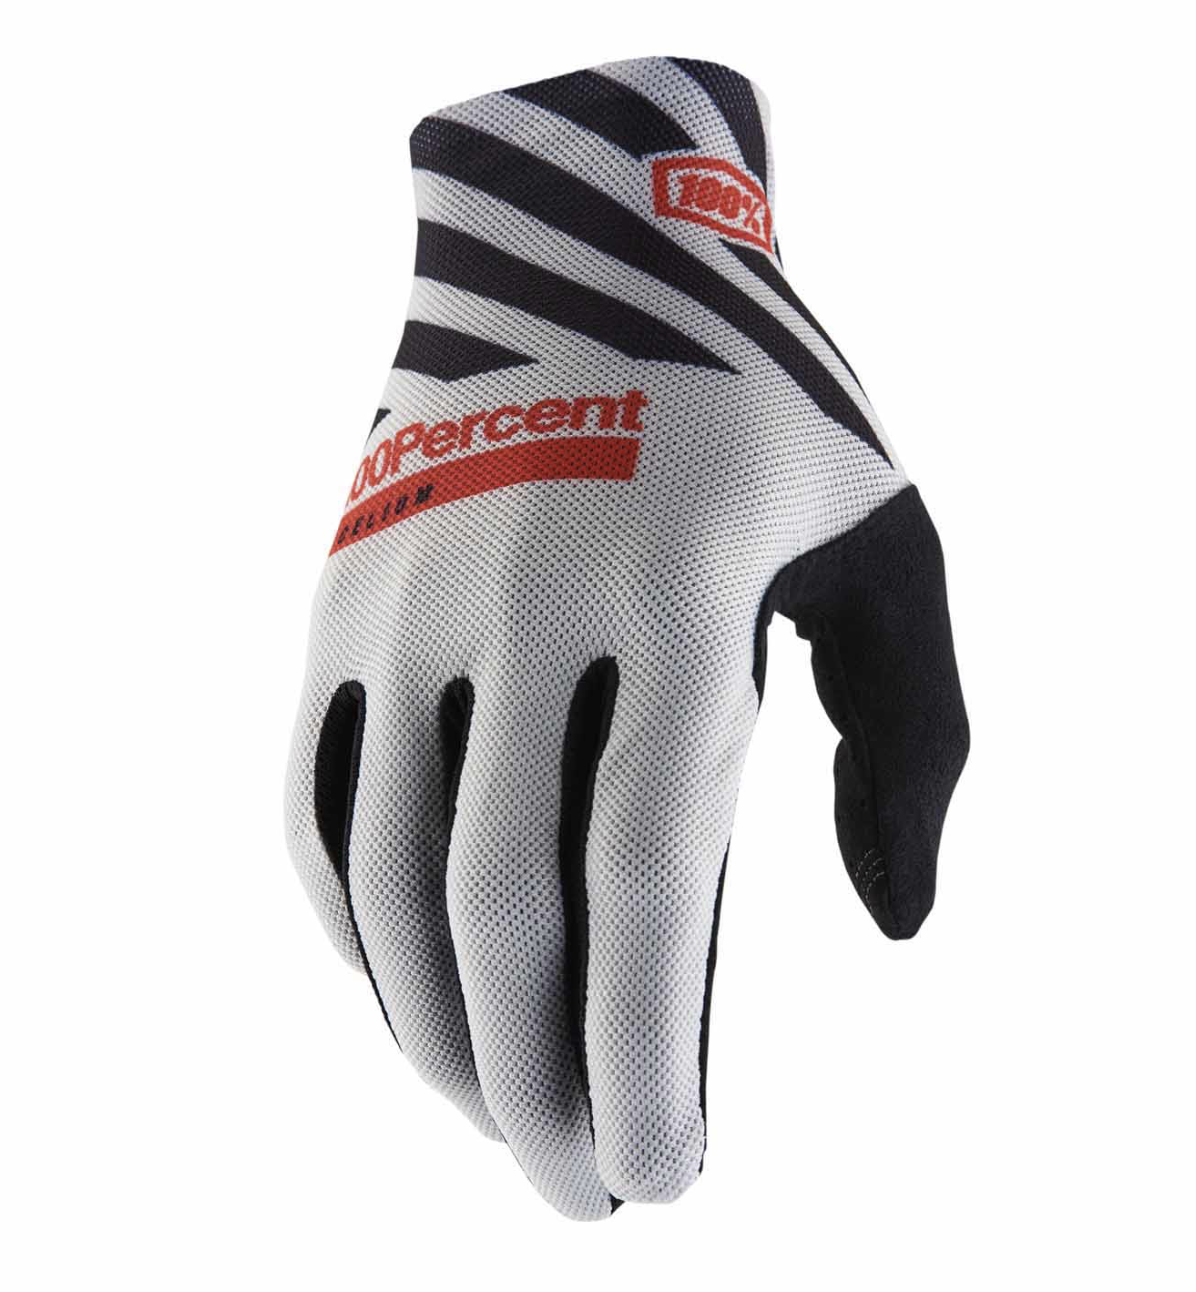 100% CELIUM Full Finger Cycling Mountain Bike Gloves Grey - XL Sporting Goods > Cycling > Cycling Clothing > Gloves Full Catalog 100%